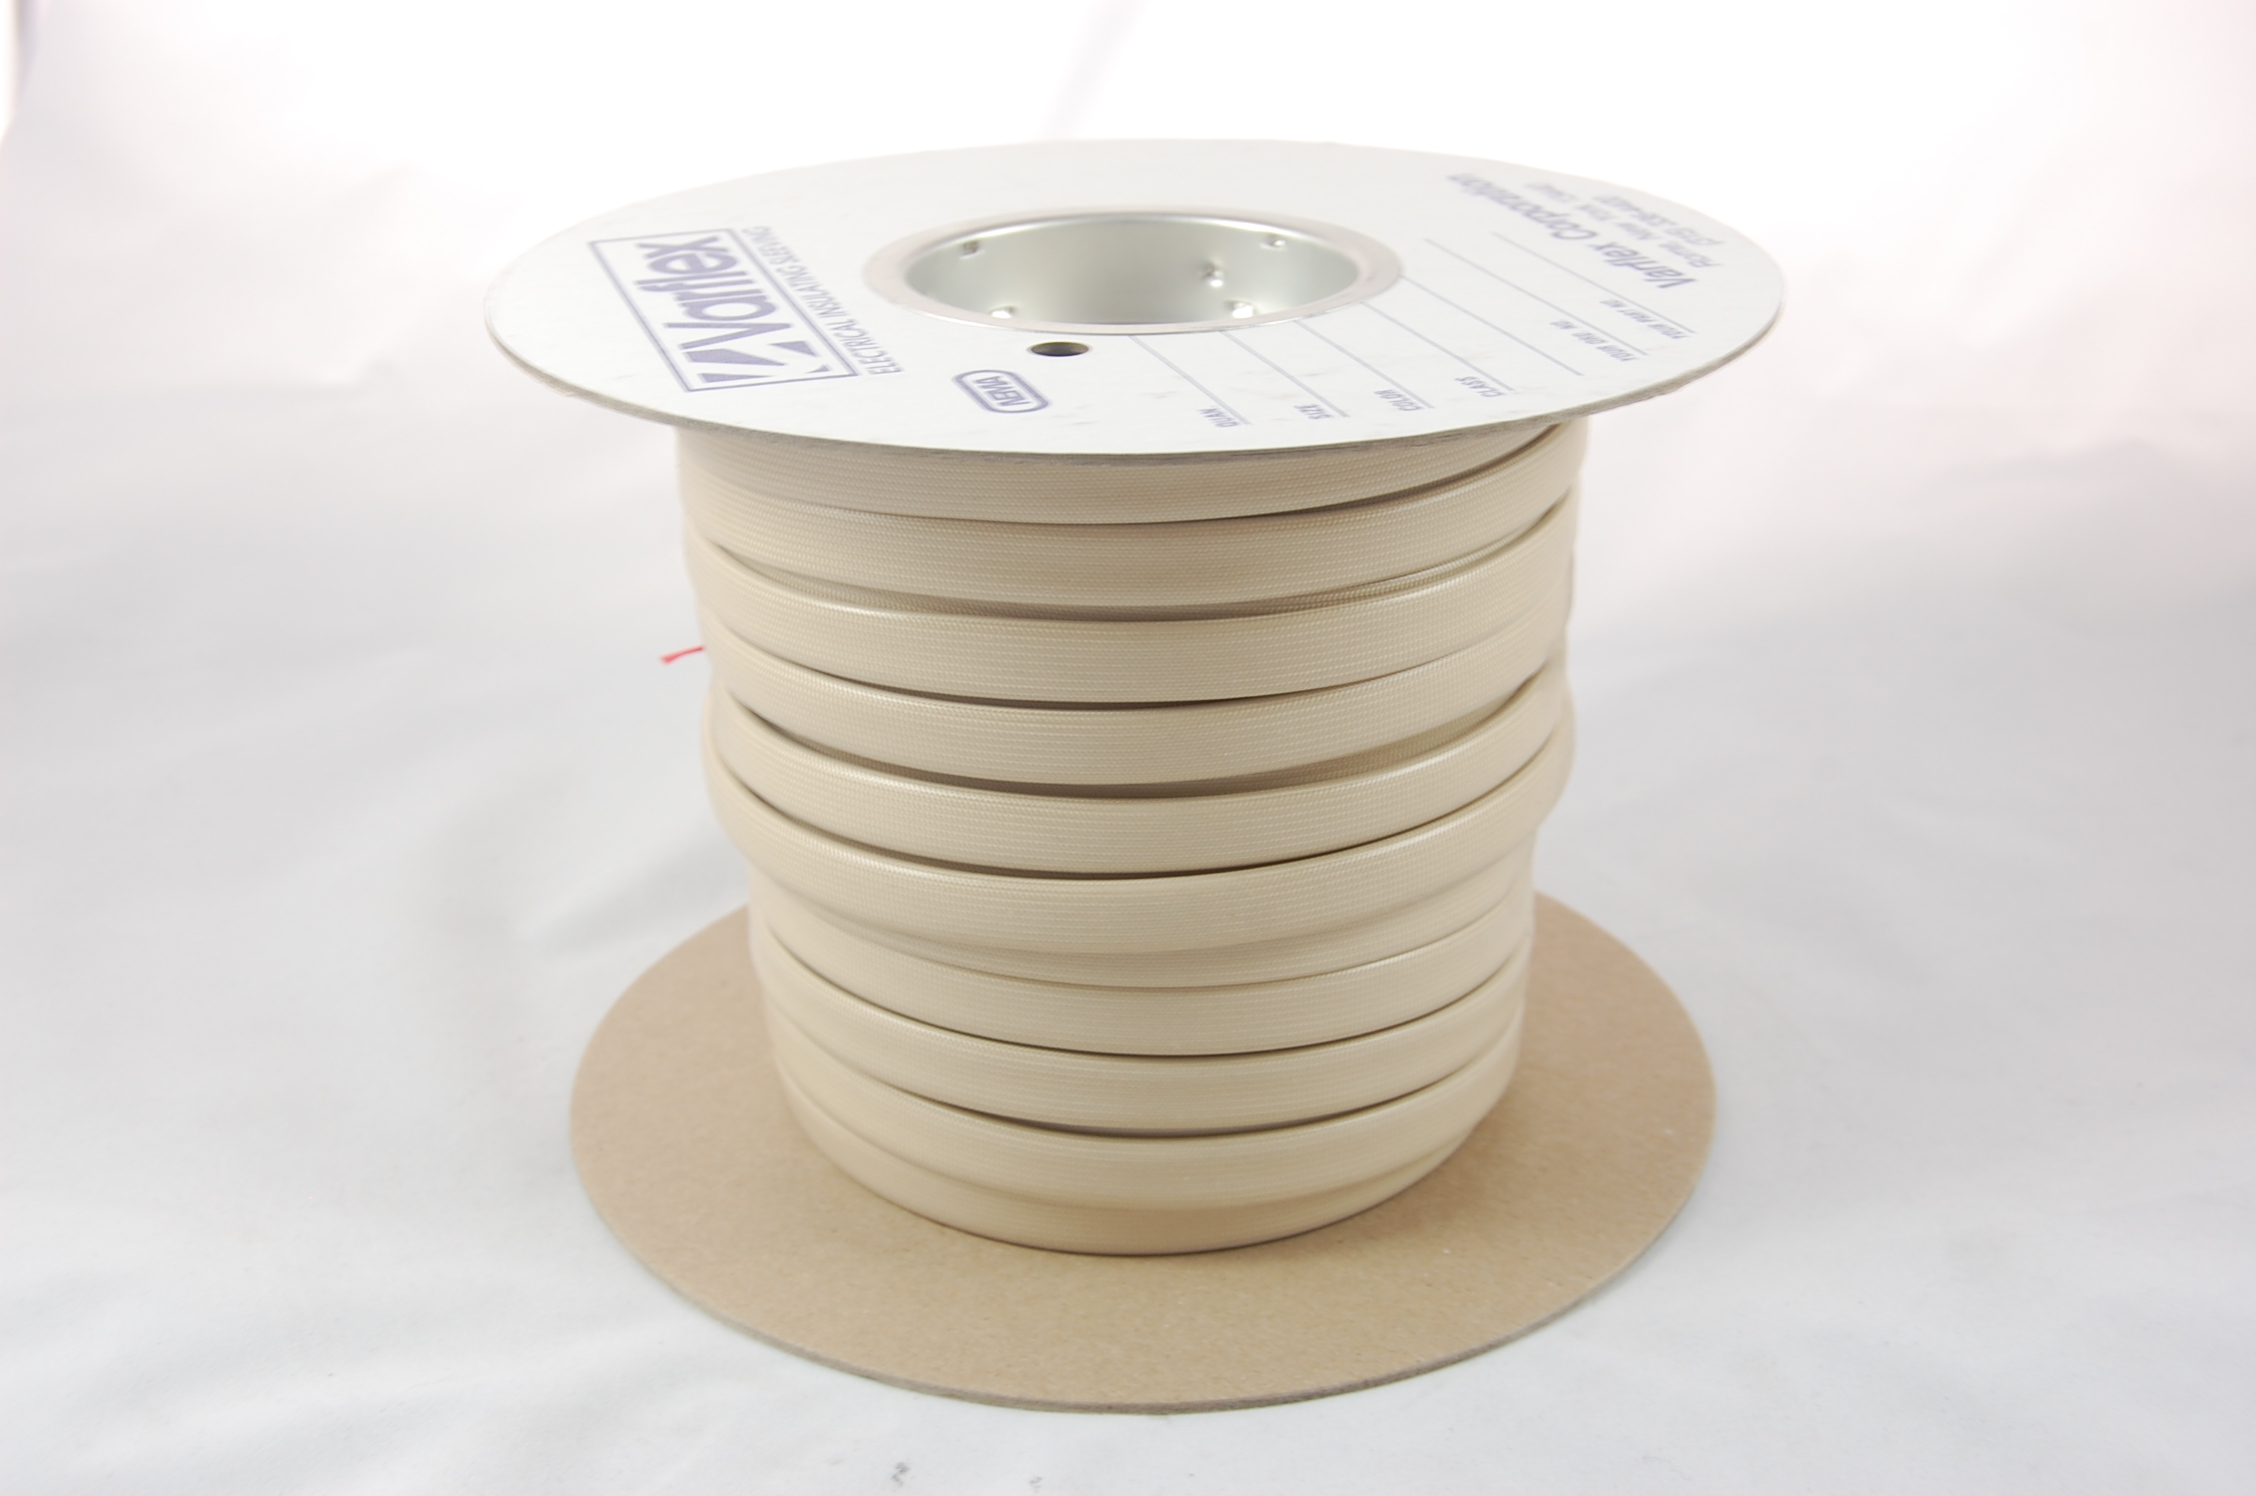 #2 AWG Varglas Silicone Rubber Grade H-A-1 (8000V) High Temperature Silicone Rubber Coated Braided Fiberglass Sleeving 200°C, natural, 150 FT per spool